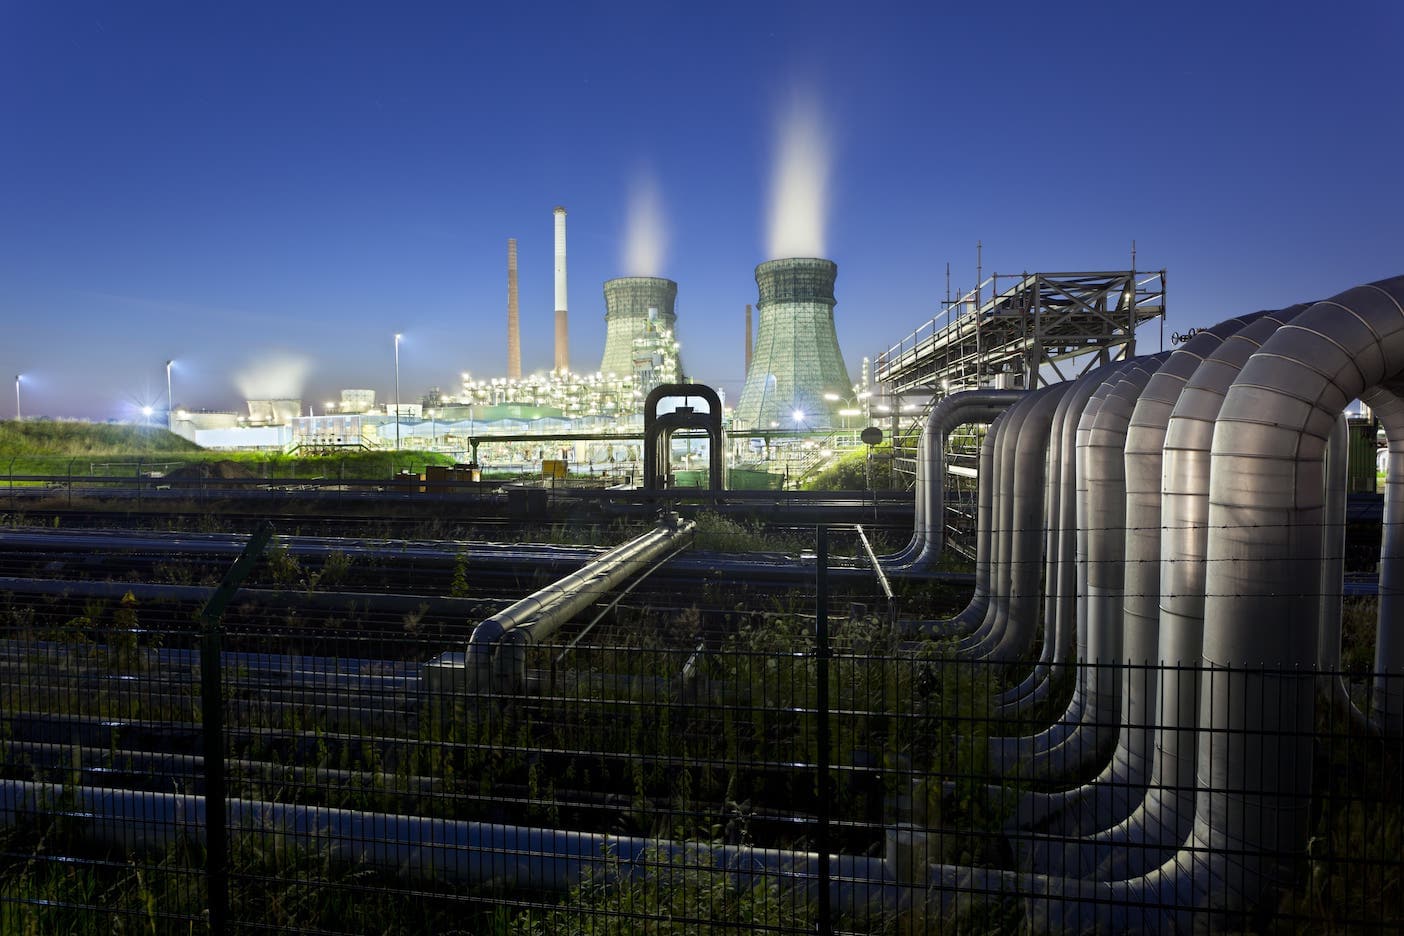 refinery-and-pipelines-at-night-P9JHXEQ copie